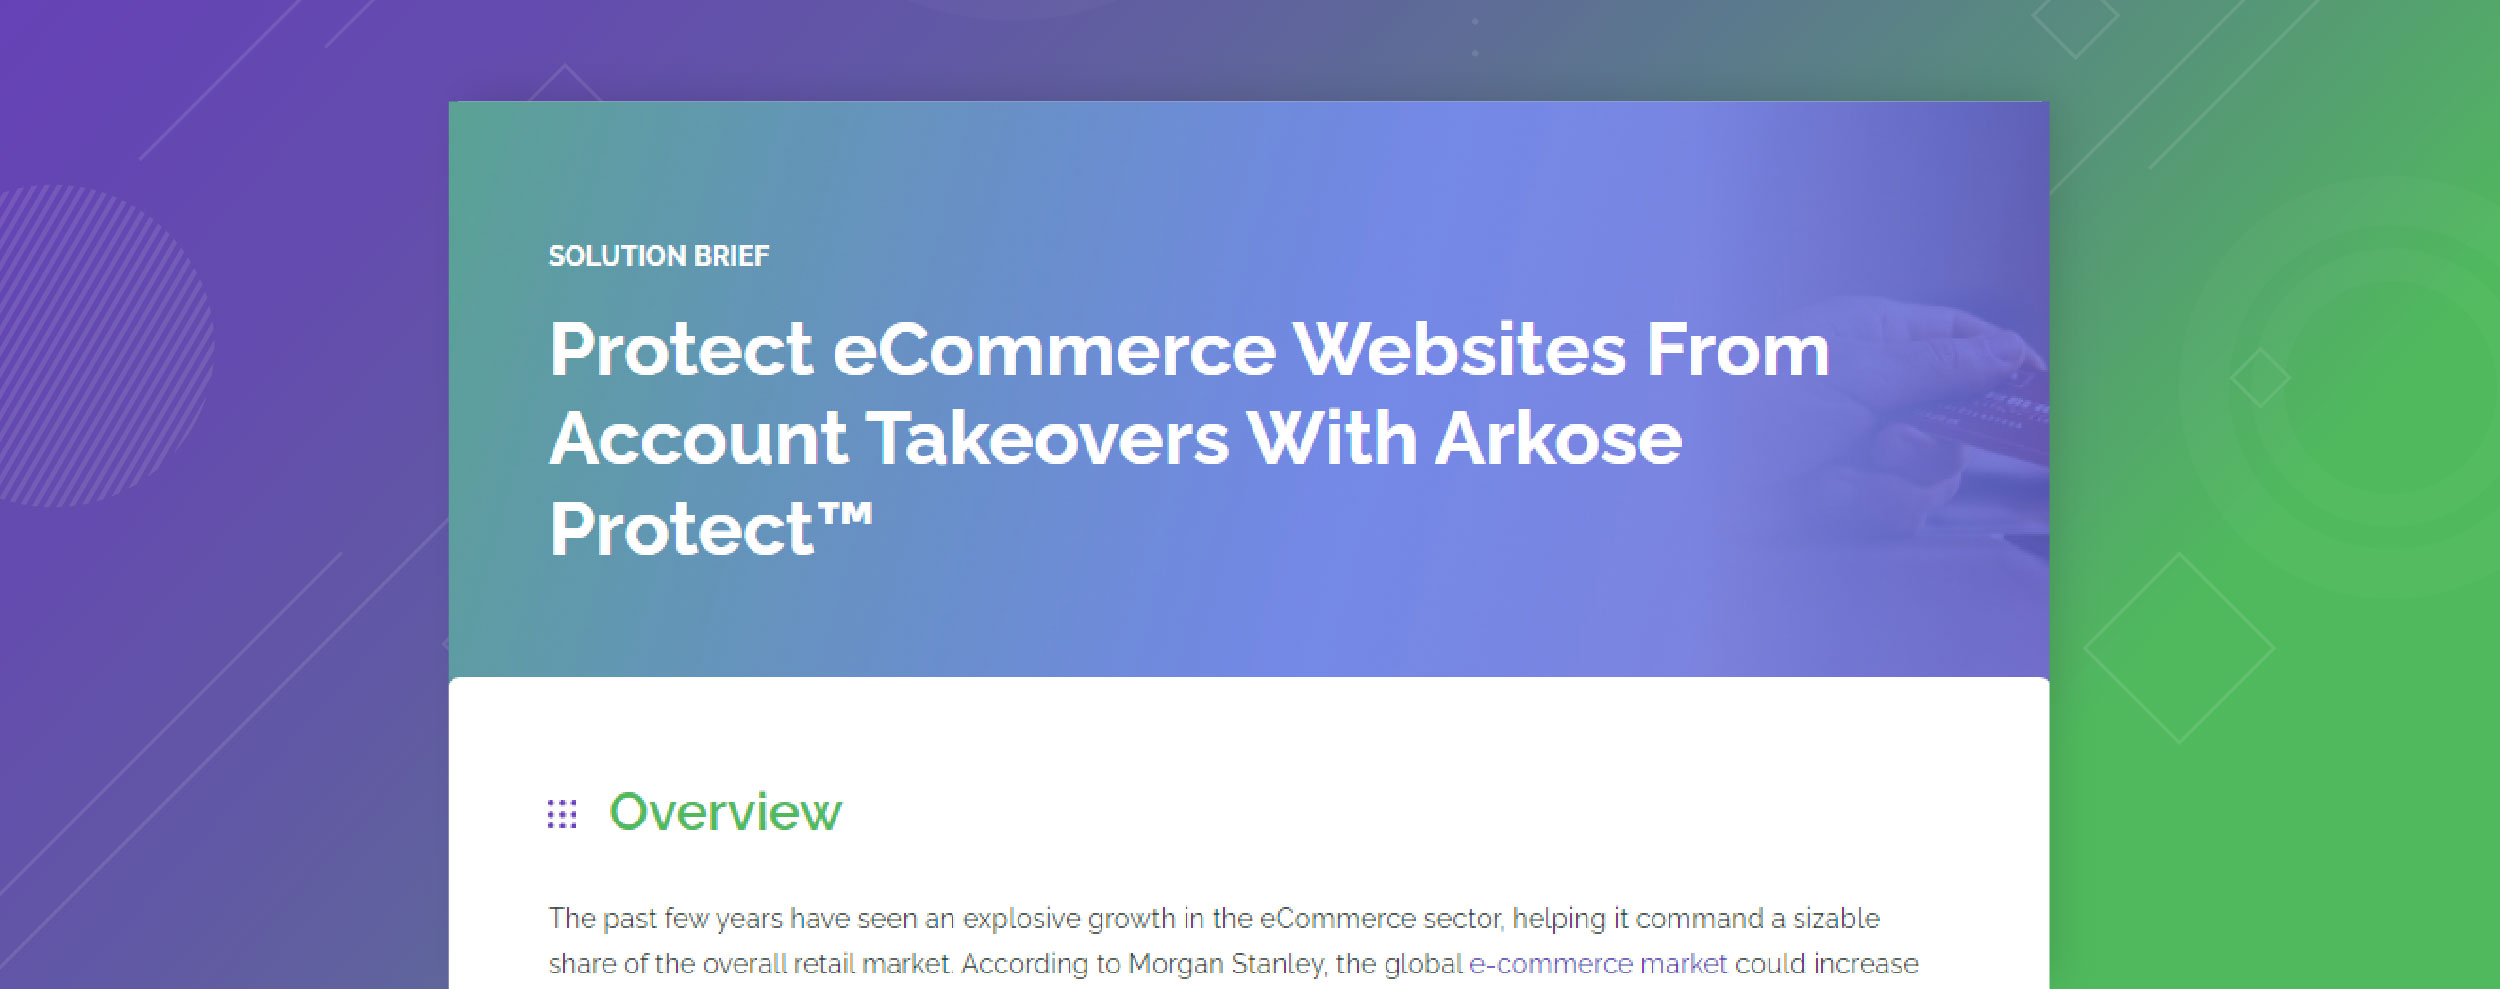 Protect eCommerce Websites from Account Takeovers solution brief